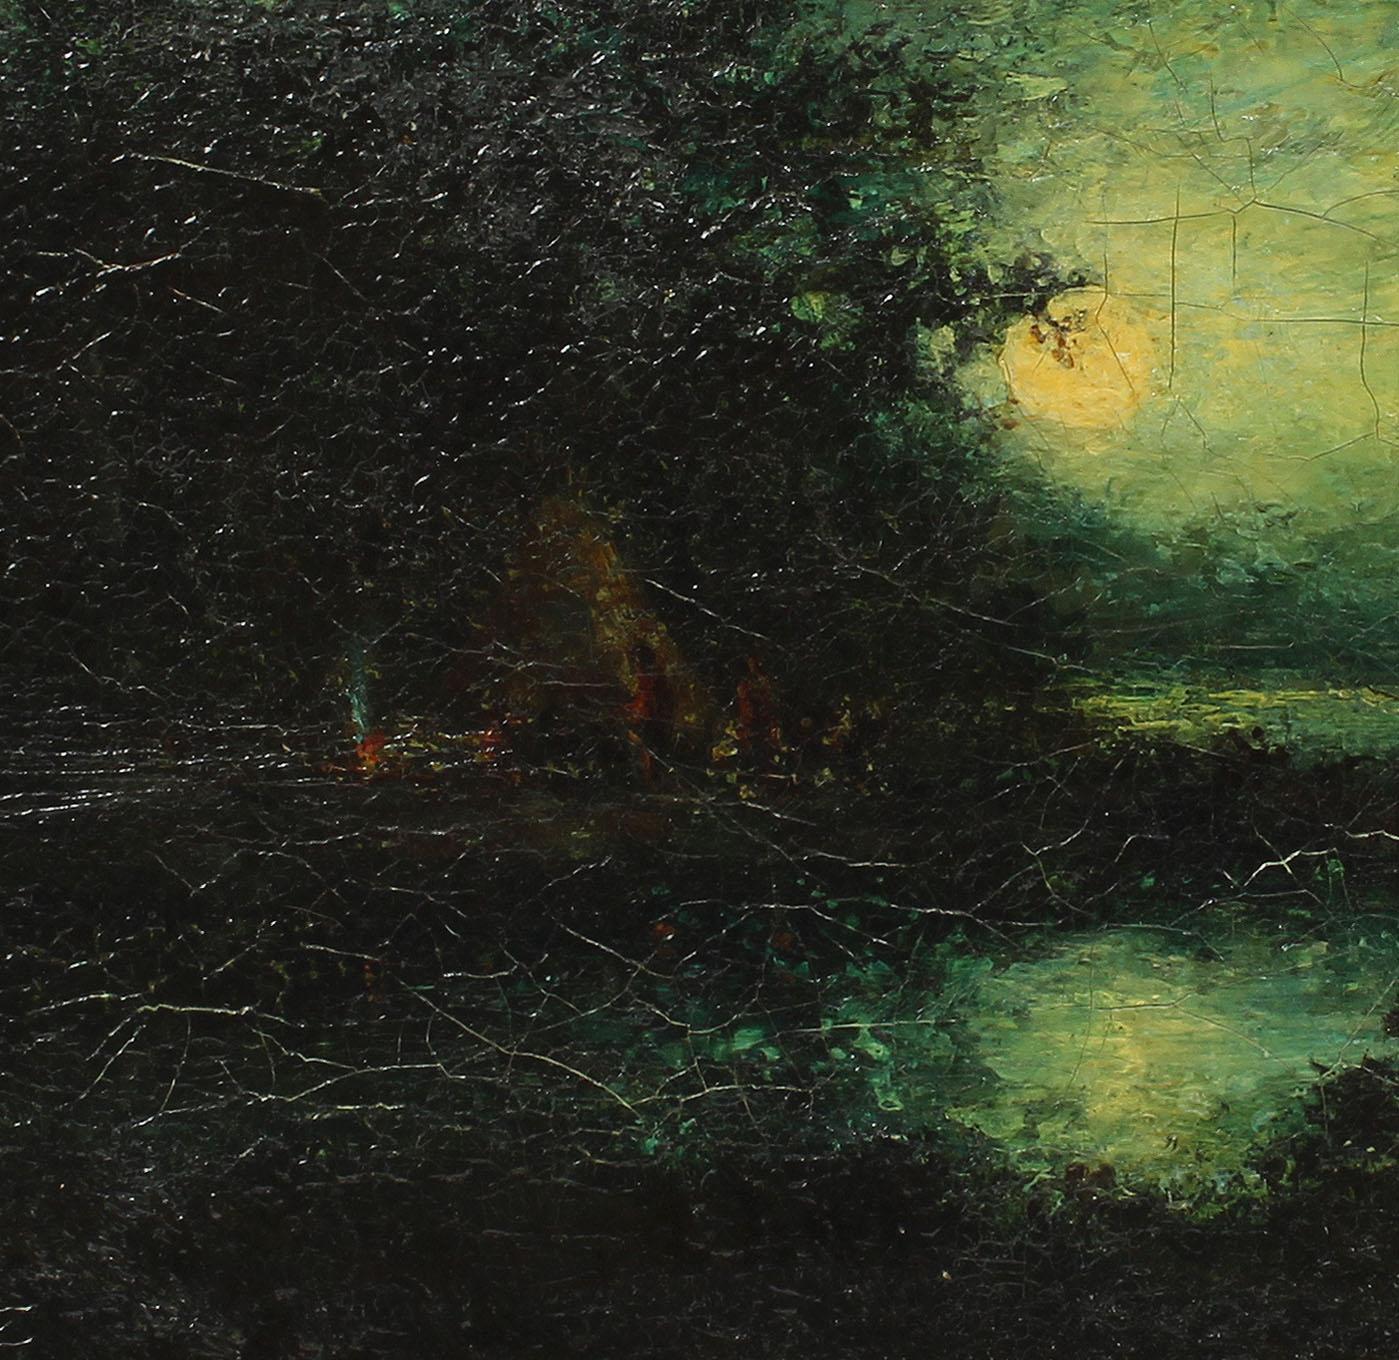 American Masterpiece Moonlit Nocturnal Glowing Landscape Original Oil Painting 2 - Brown Landscape Painting by Hudson Mindell Kitchell